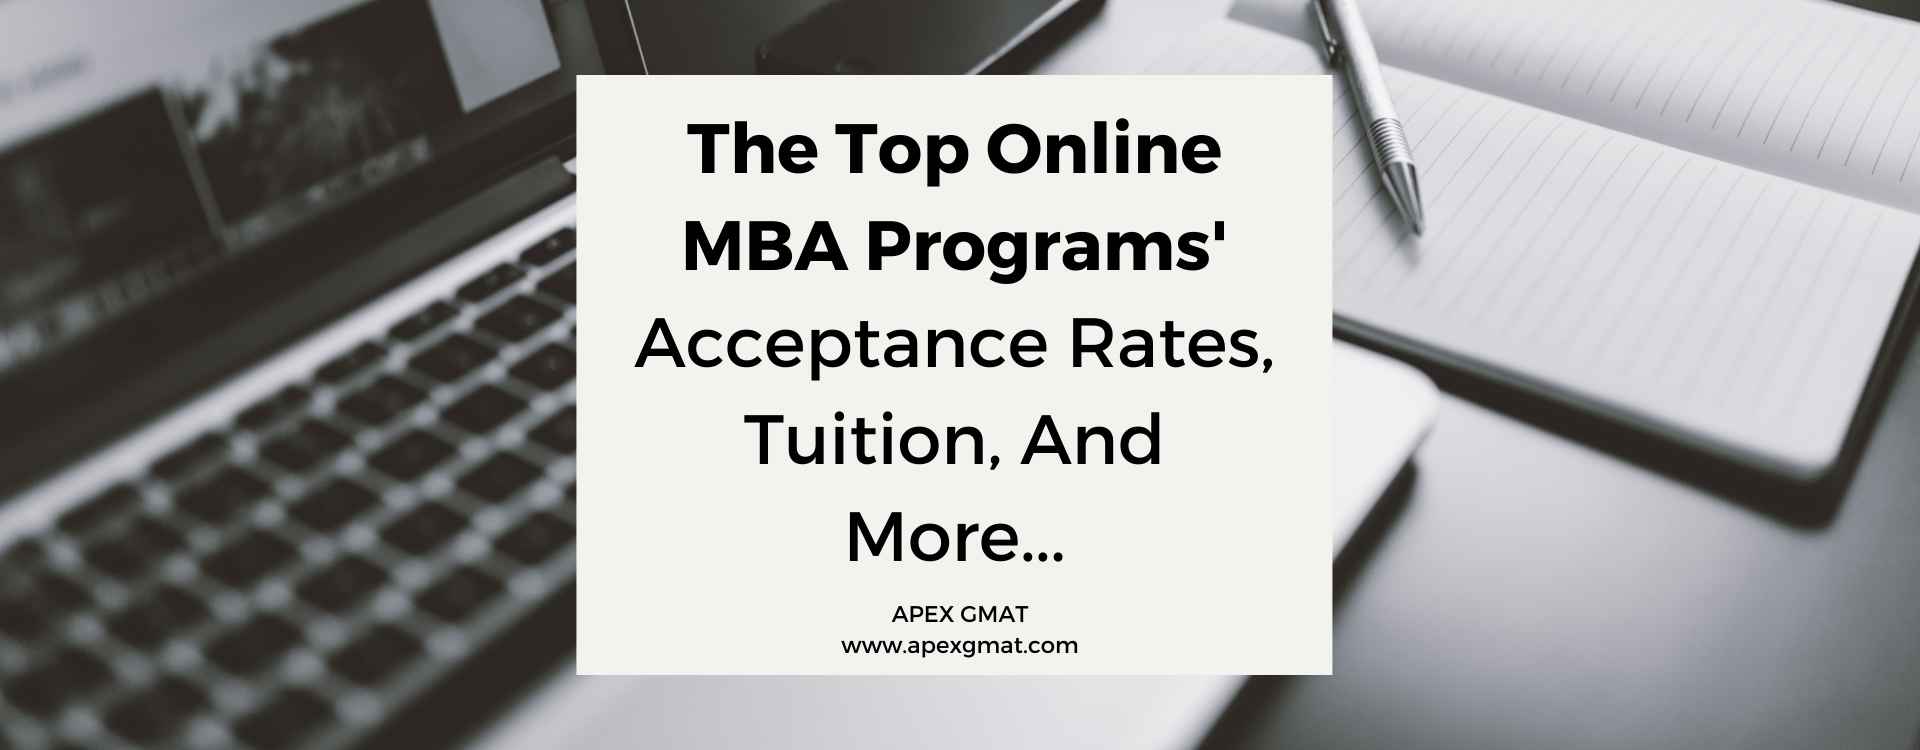 The Top Online MBA Programs’ Acceptance Rates, Tuition, And More